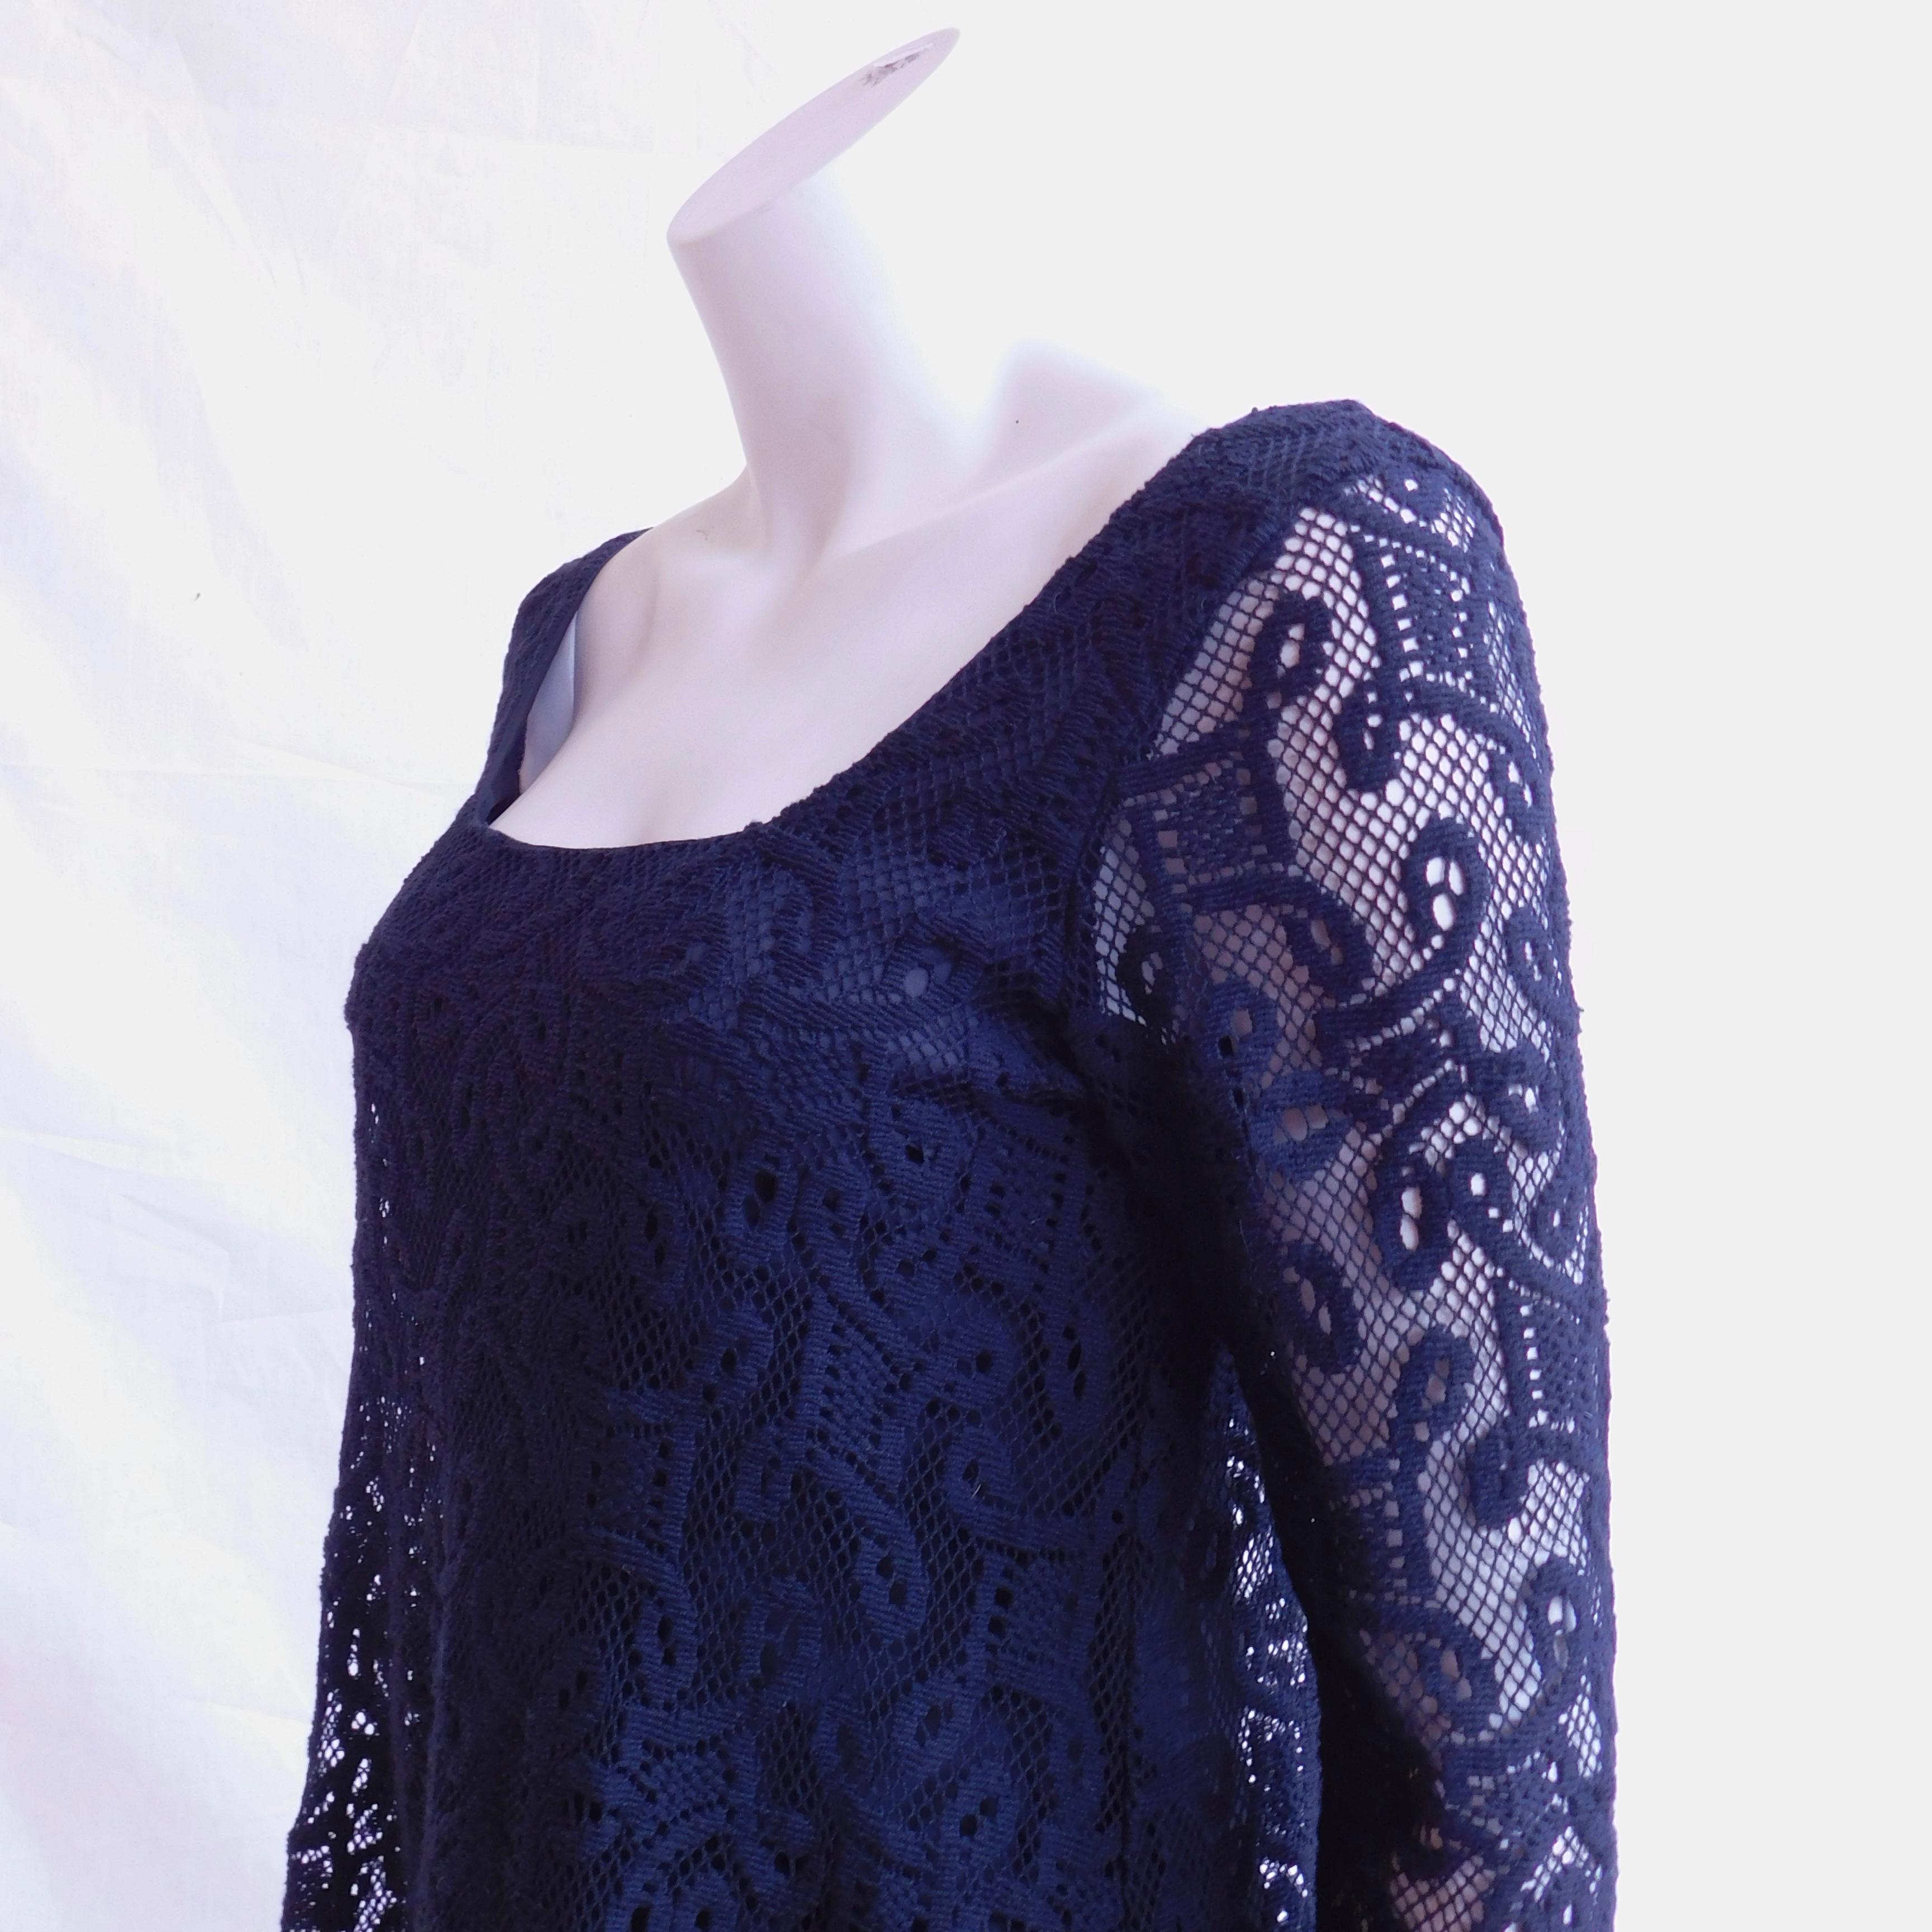 Anna Sui Black Lace Dress In Good Condition For Sale In Antwerp, BE